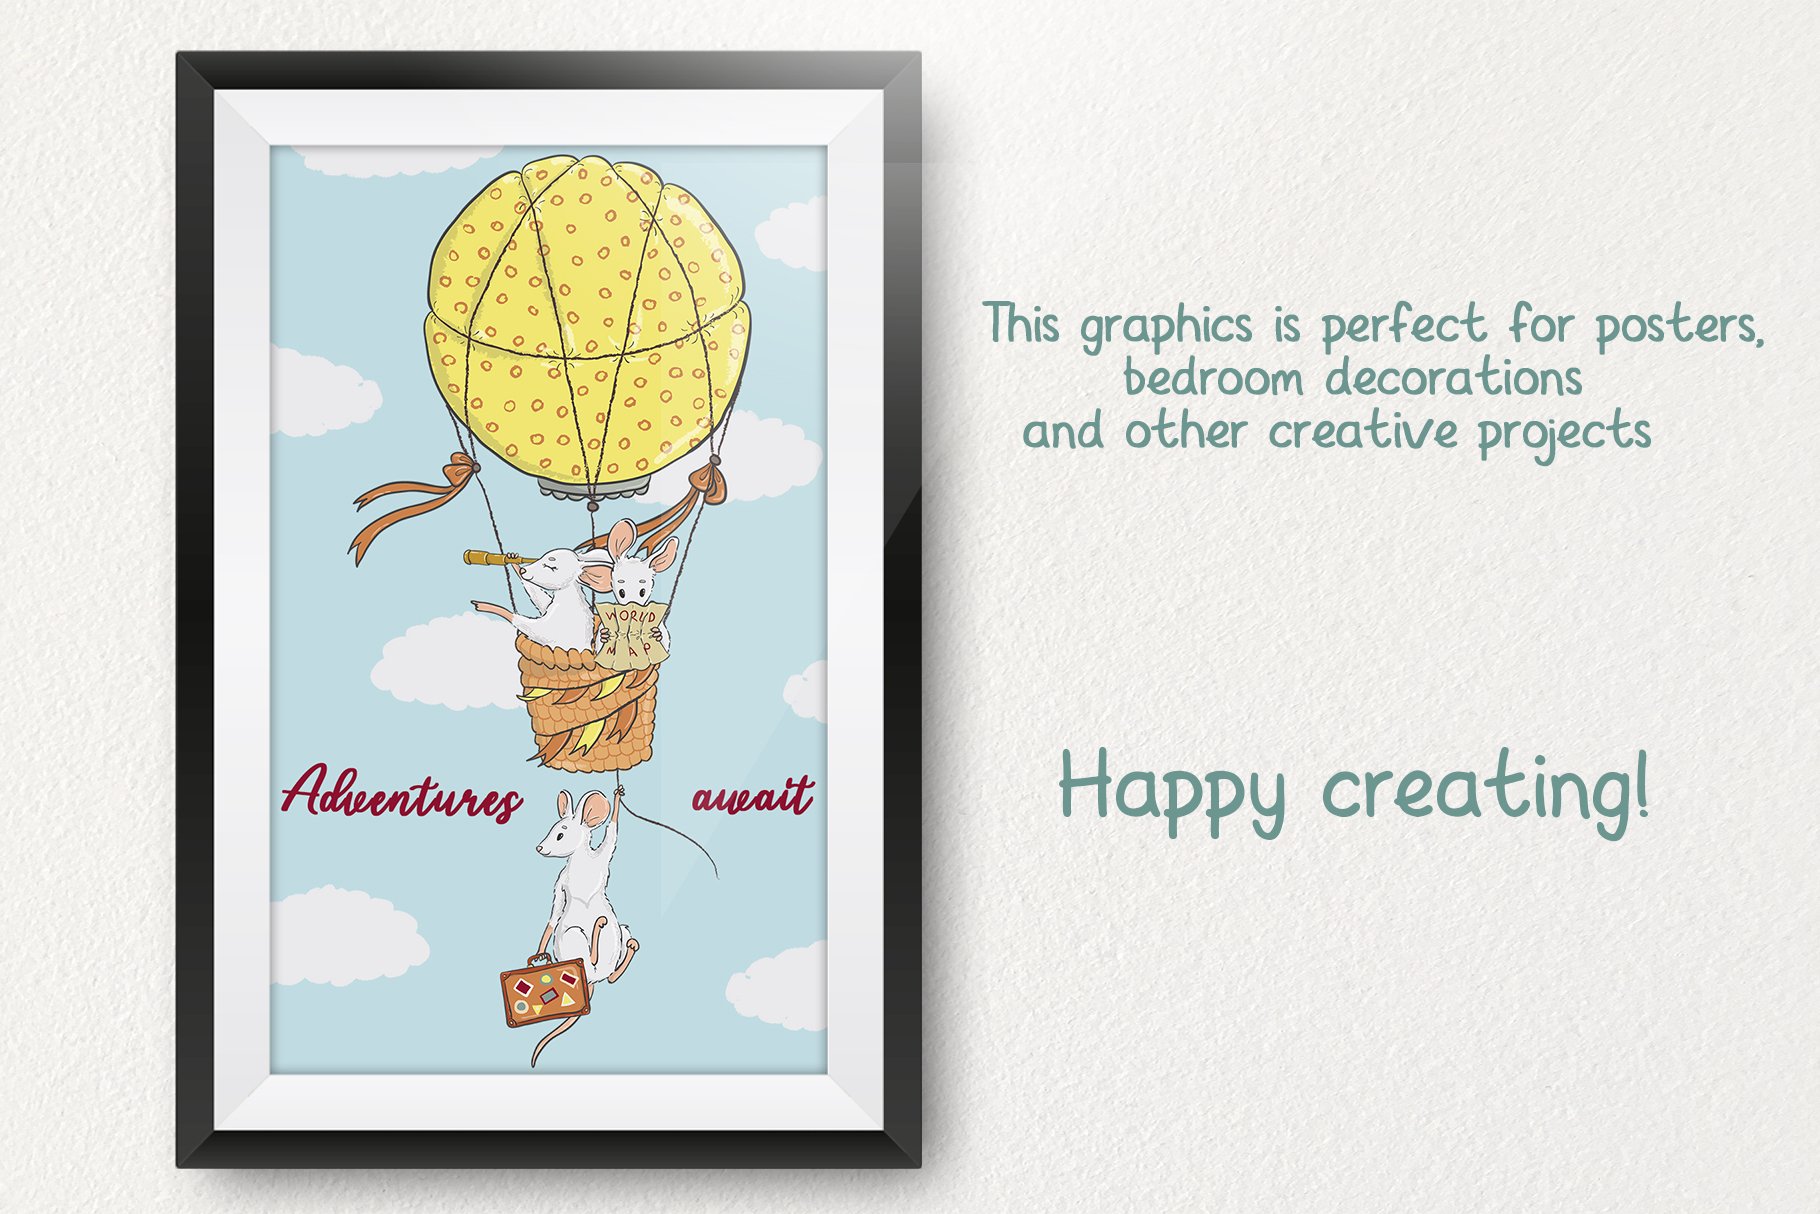 Simple big poster with yellow air balloon.